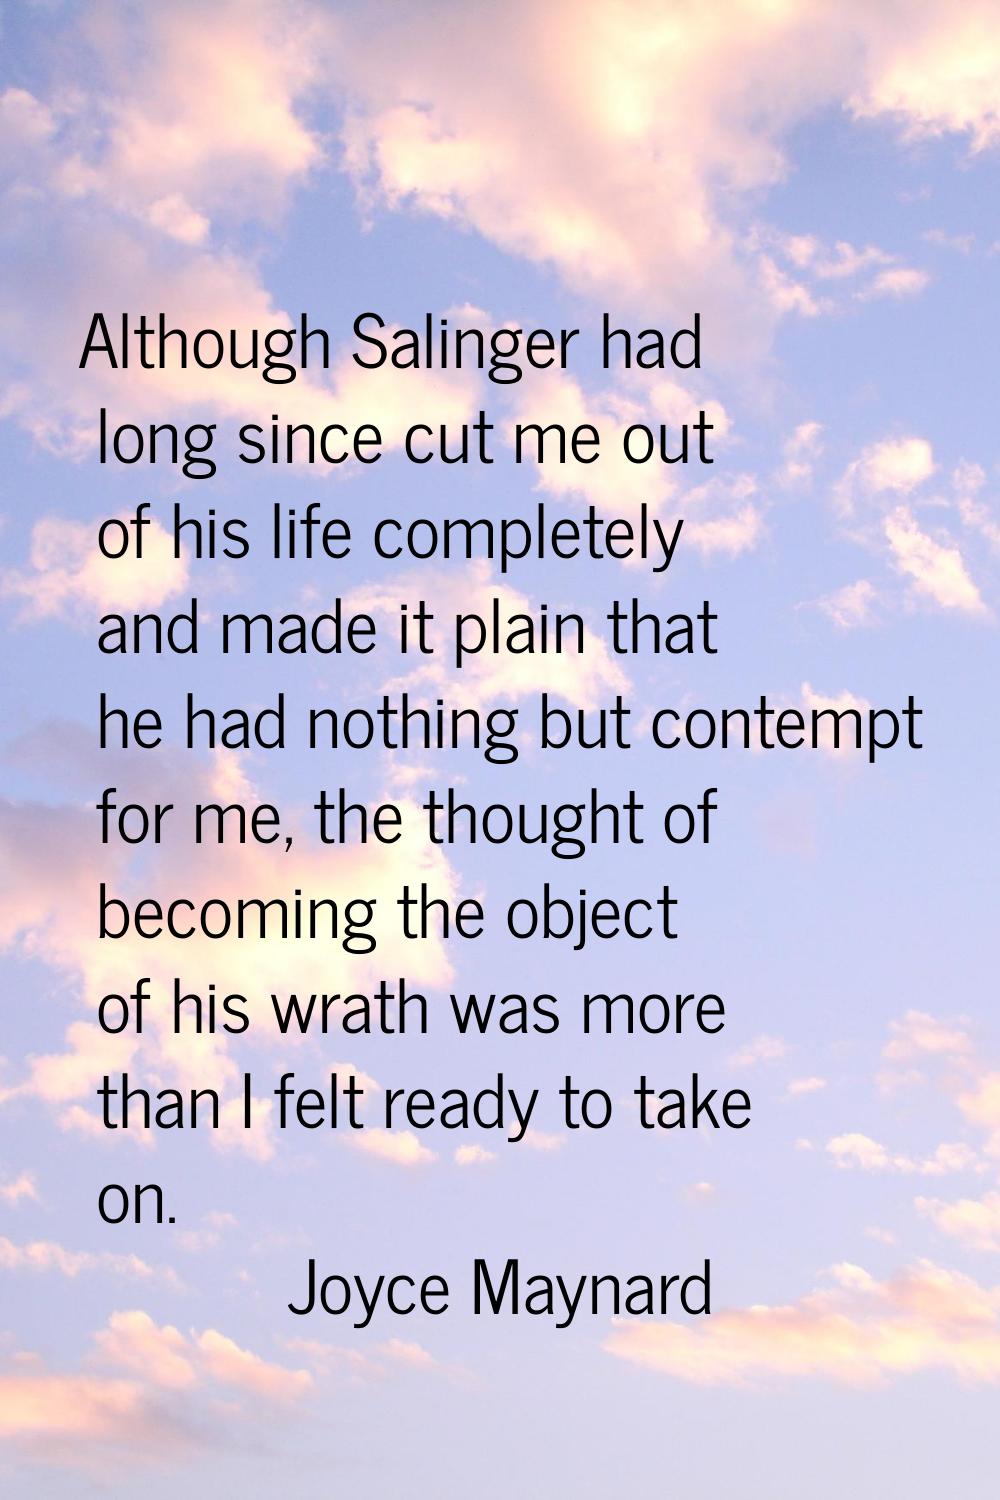 Although Salinger had long since cut me out of his life completely and made it plain that he had no